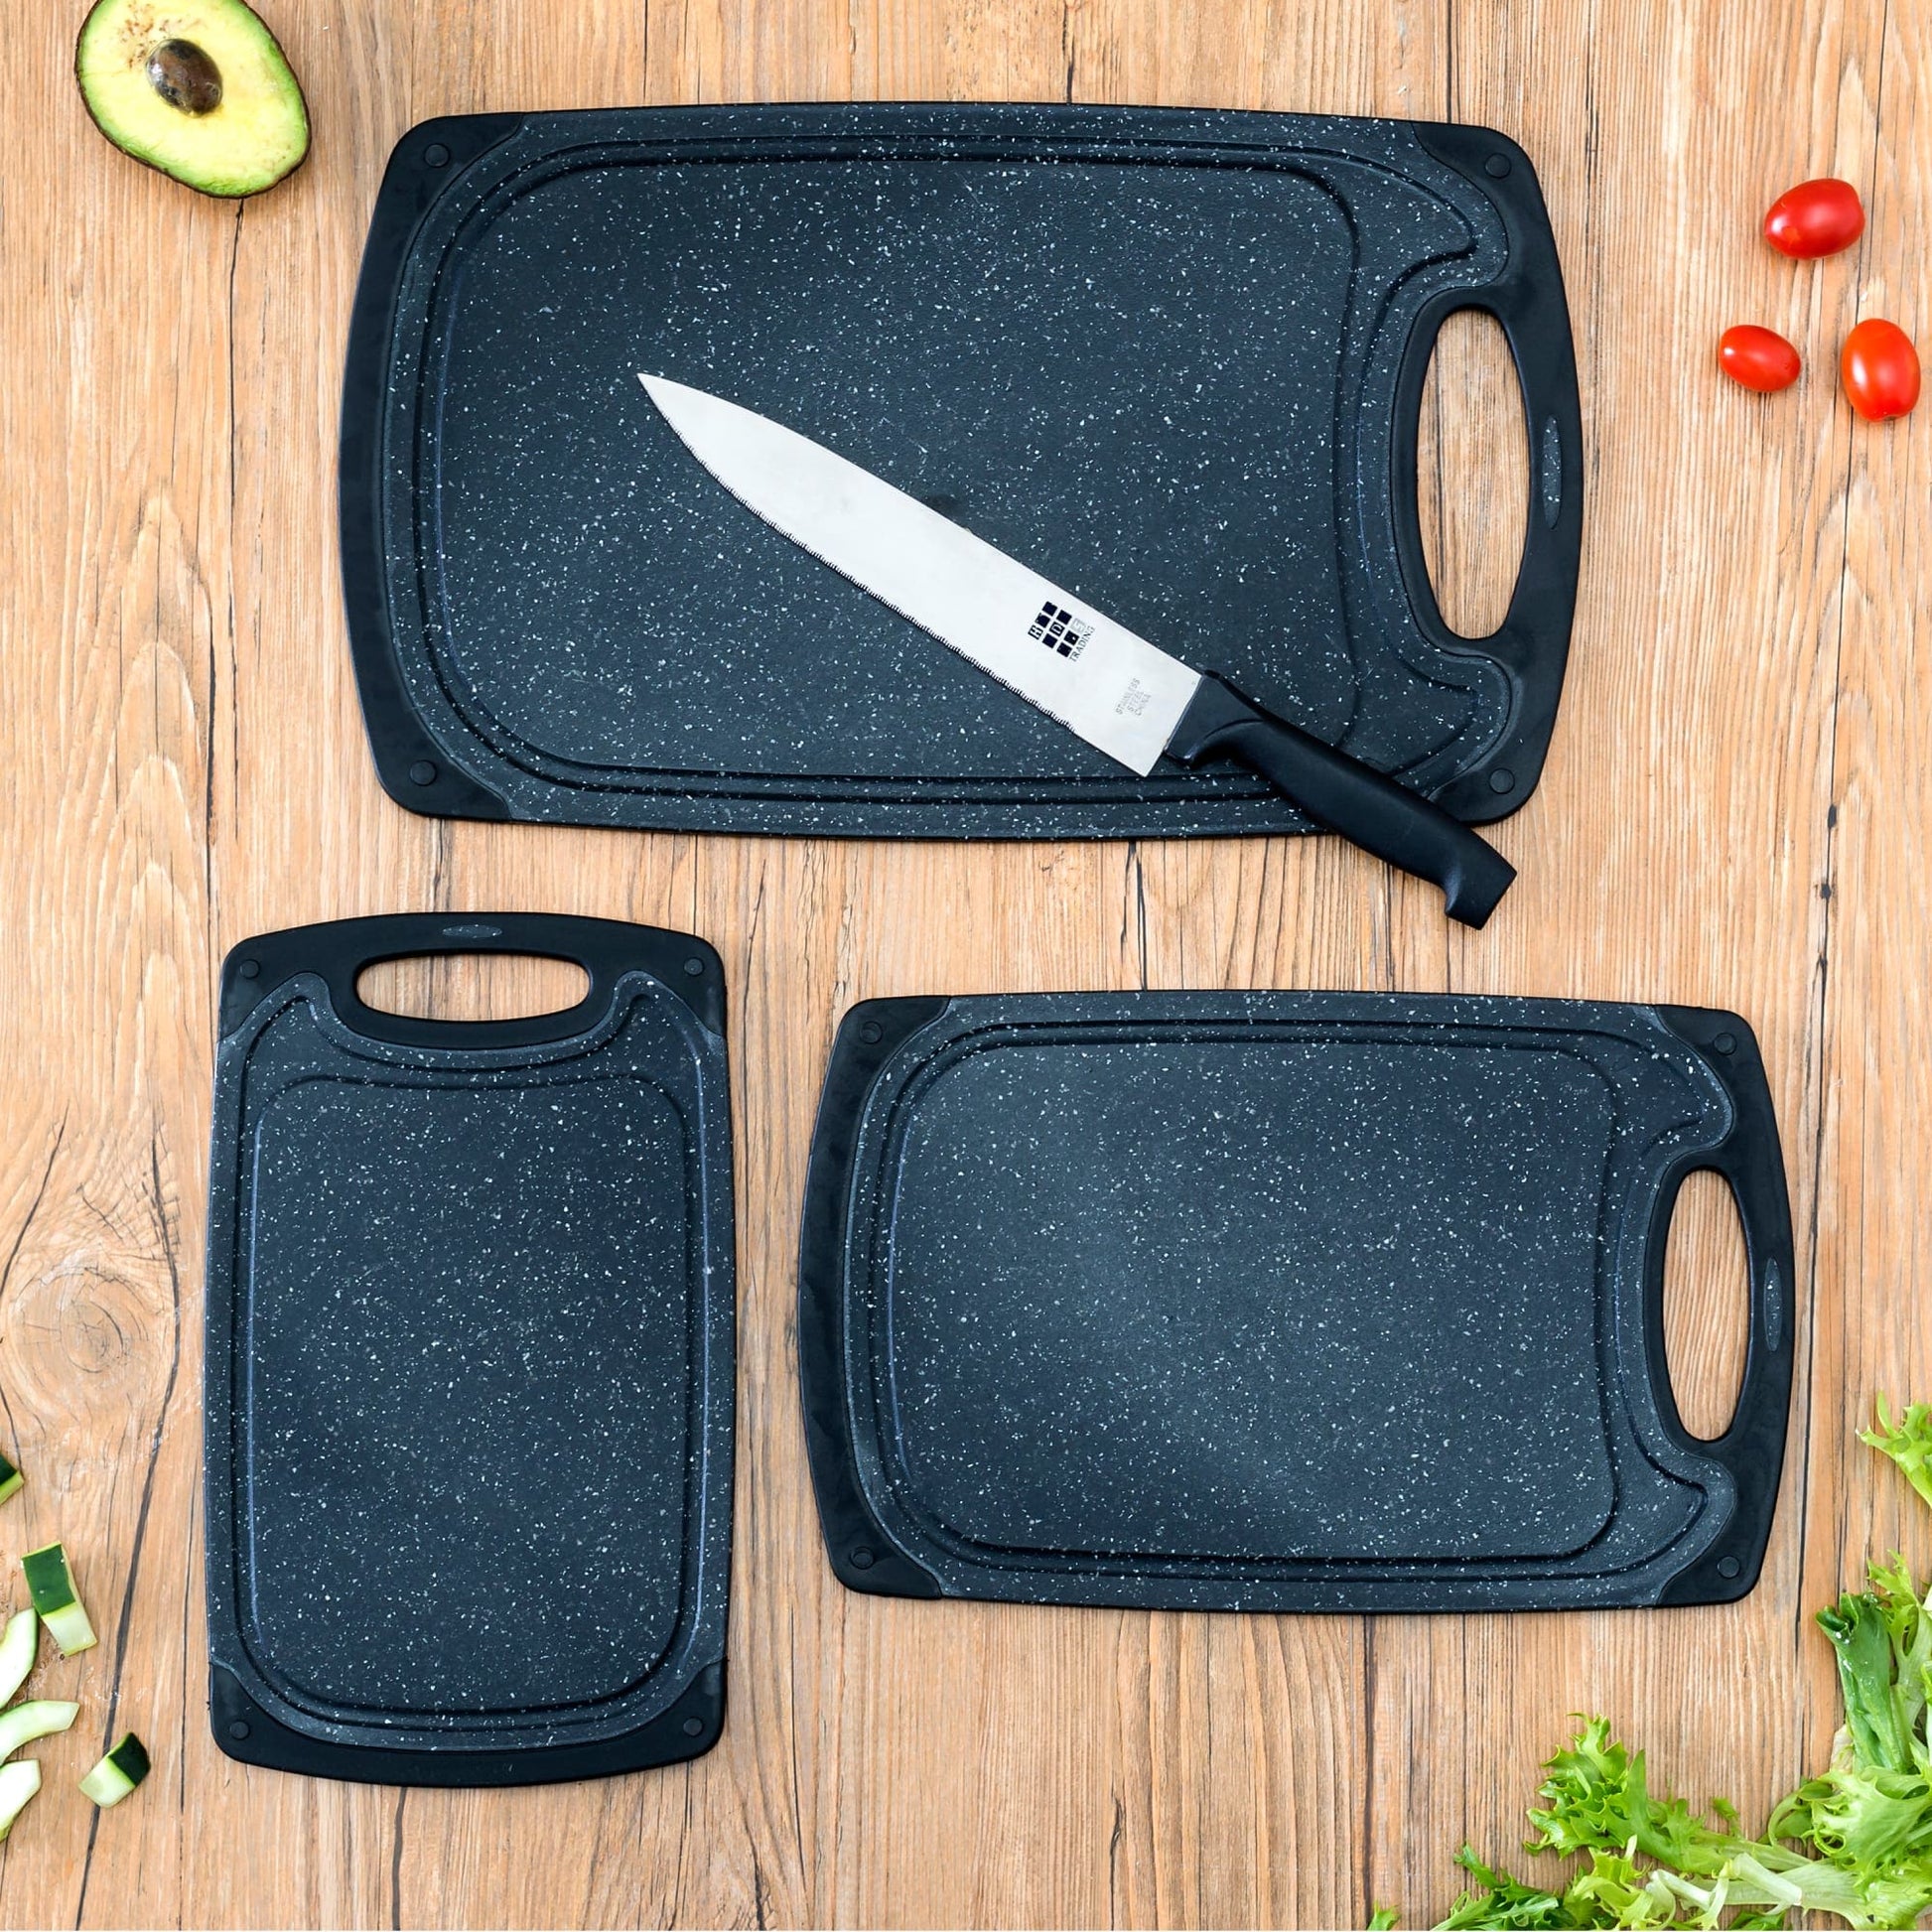 3PCS Cutting Boards for Kitchen - Chopping Board 3-Pack Different